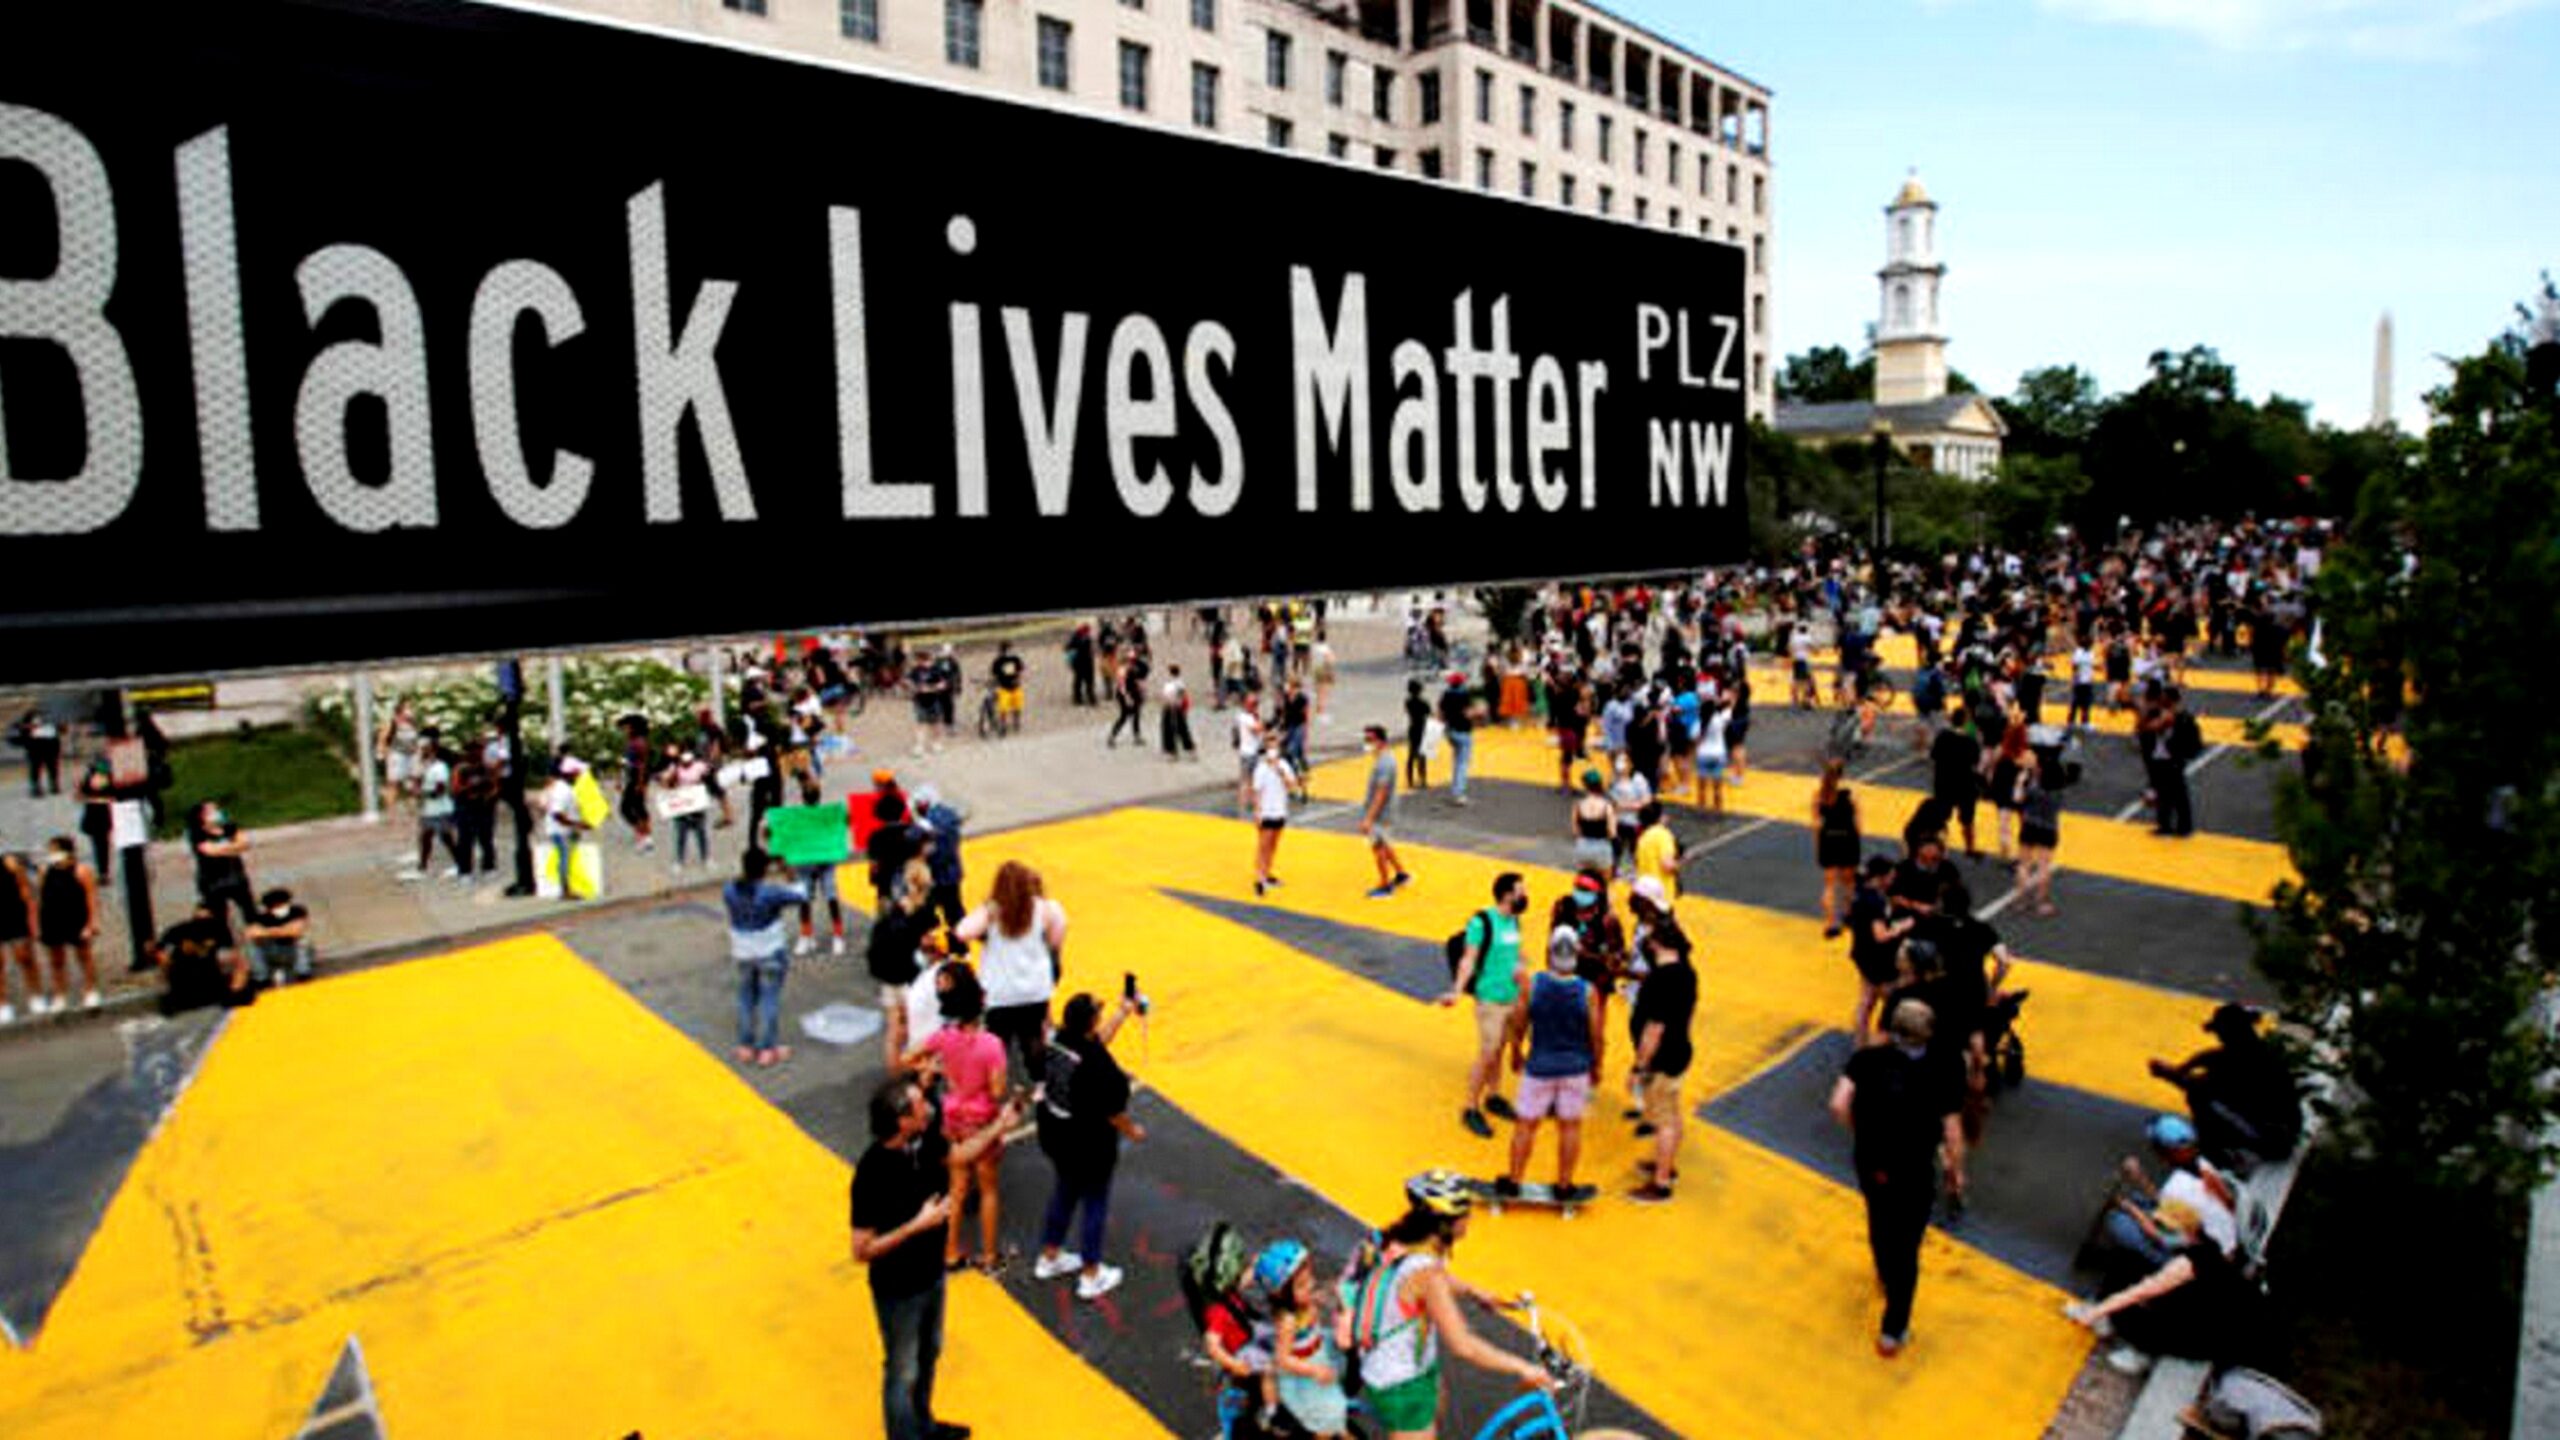 A picture of the people standing at the black lives matter